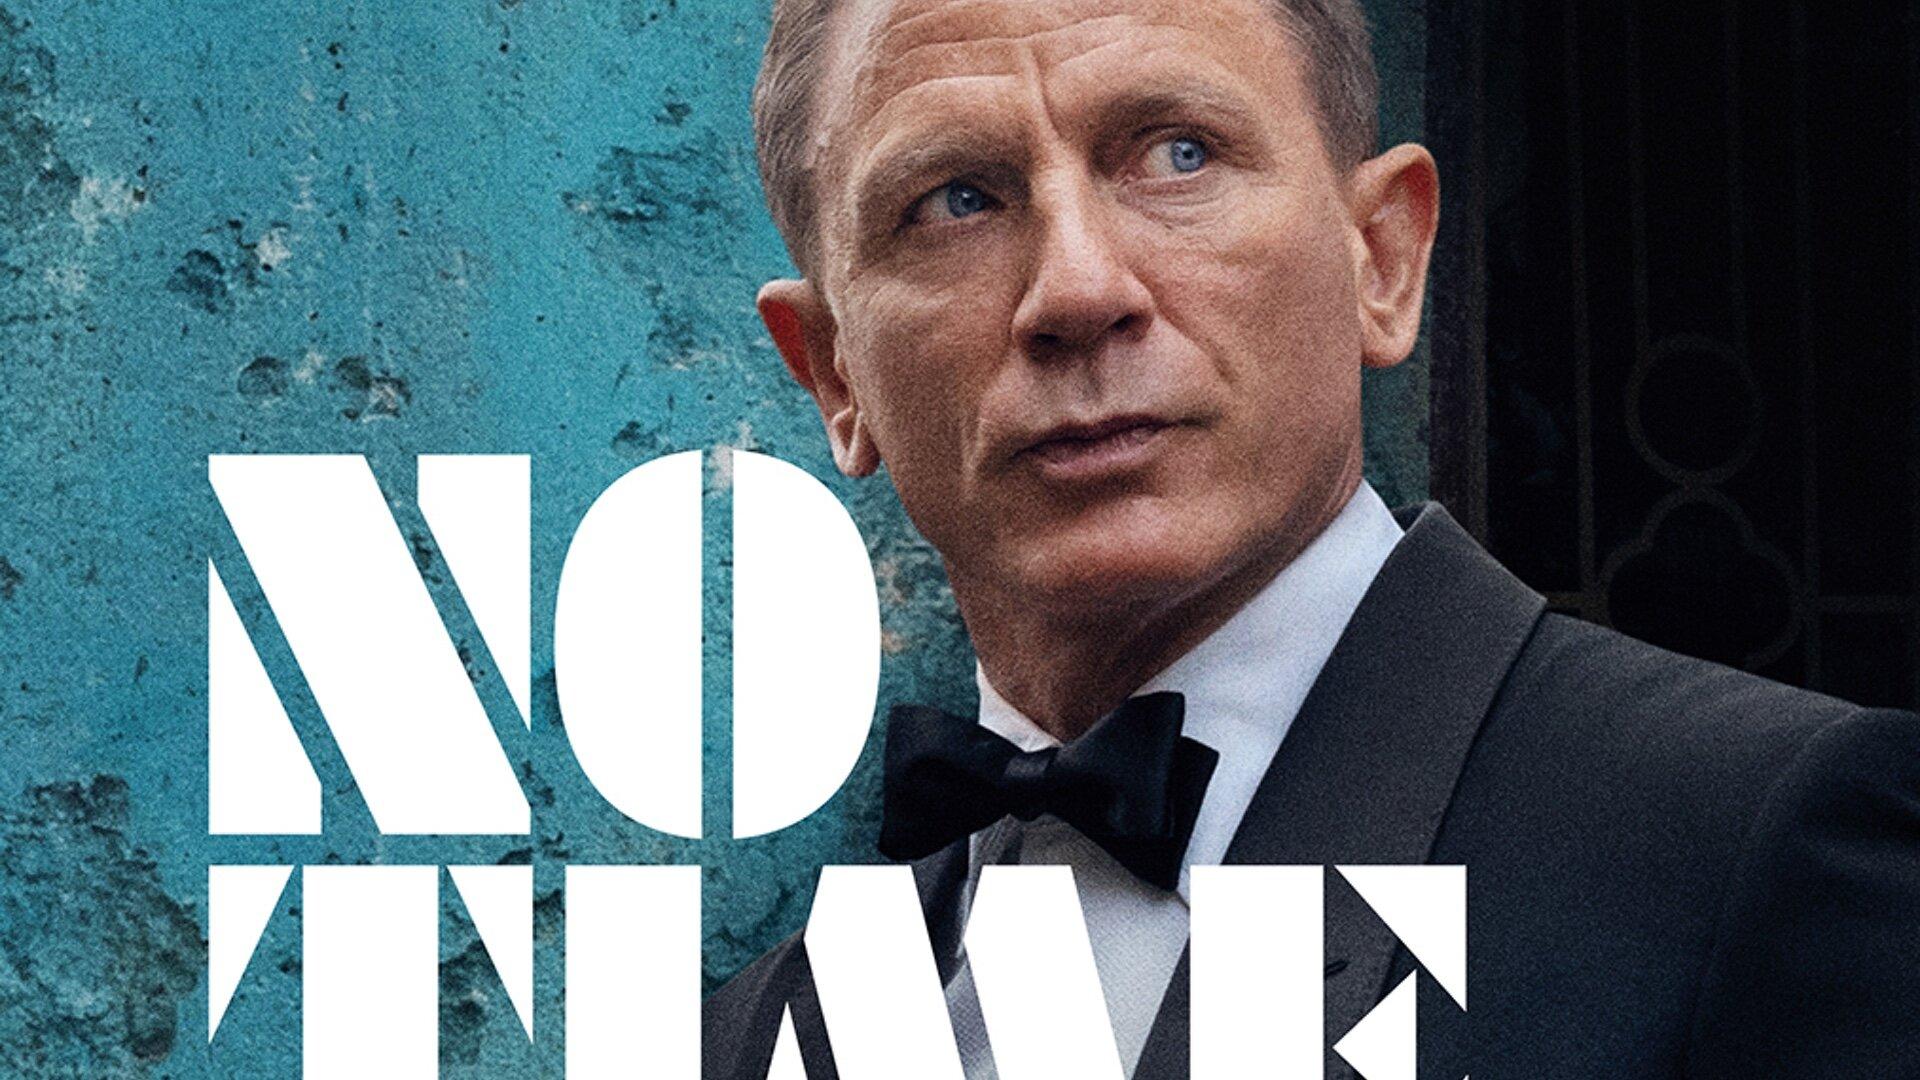 James Bond is Back in First Poster For NO TIME TO DIE